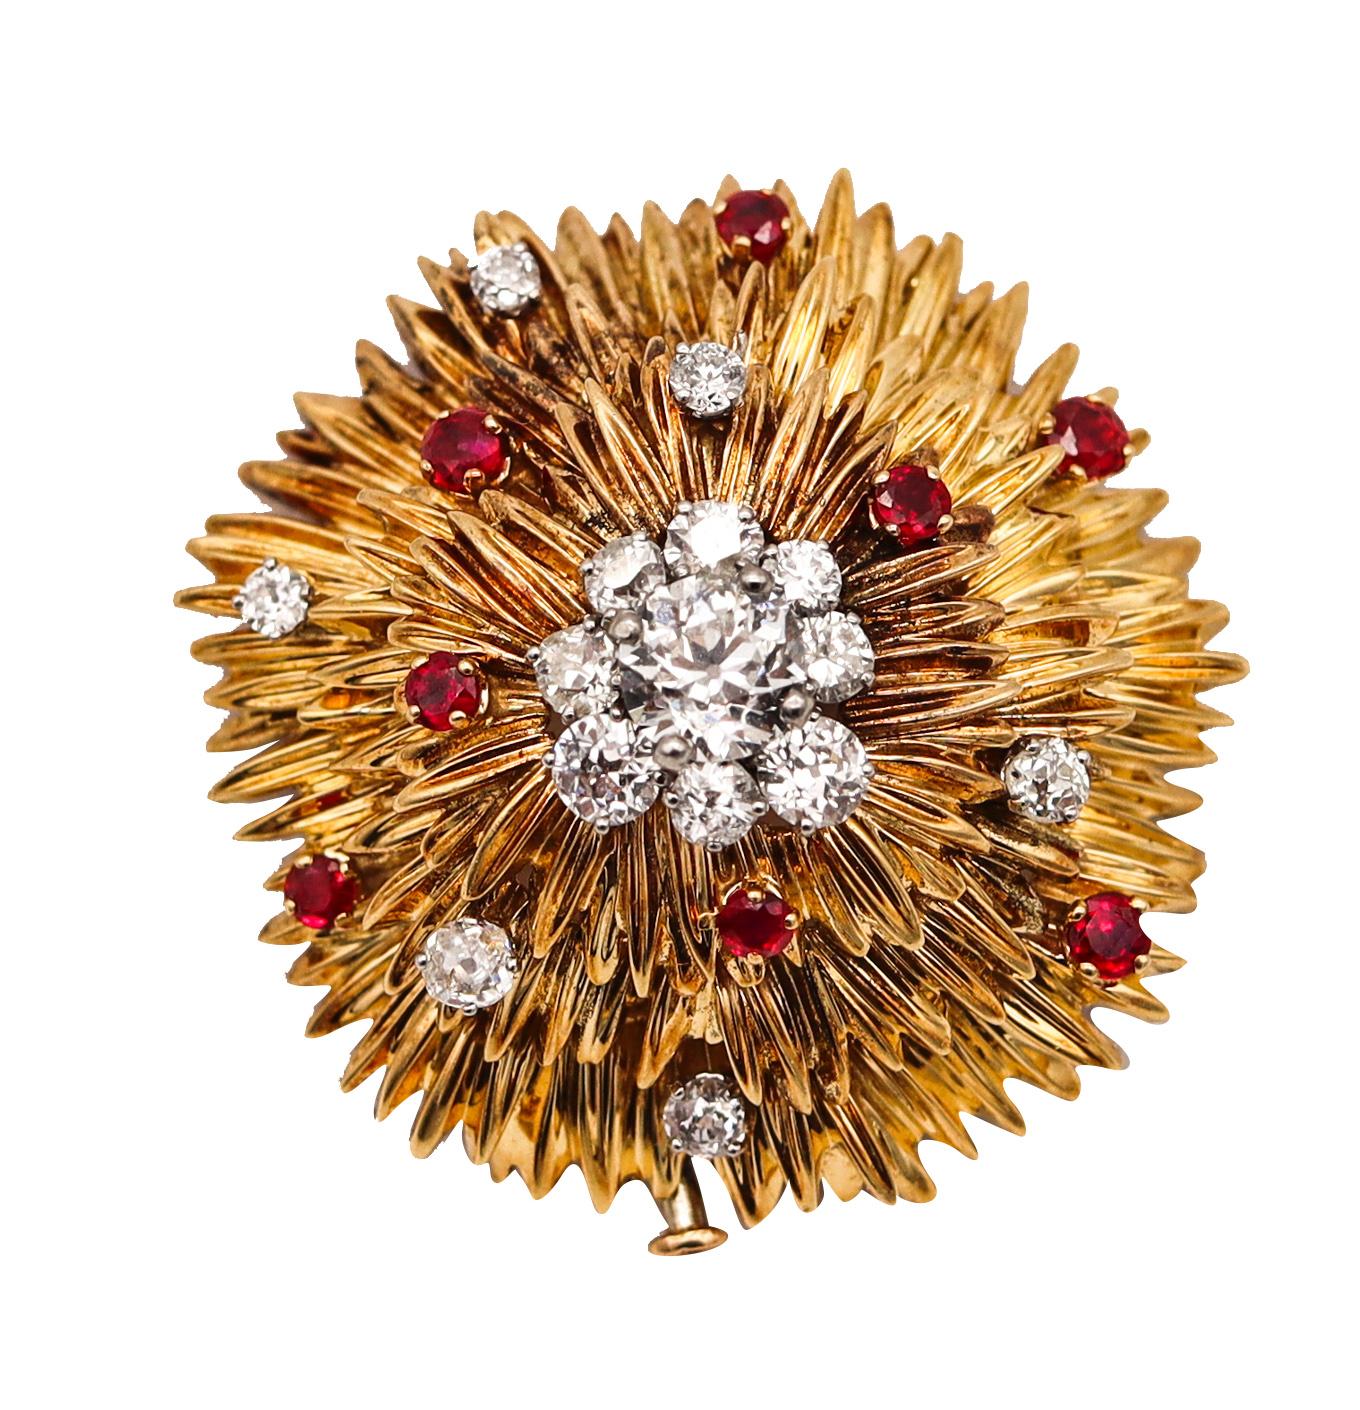 Van Cleef & Arpels 1960 Paris Brooch 18kt Gold with 4.64cts Diamonds & Rubies For Sale